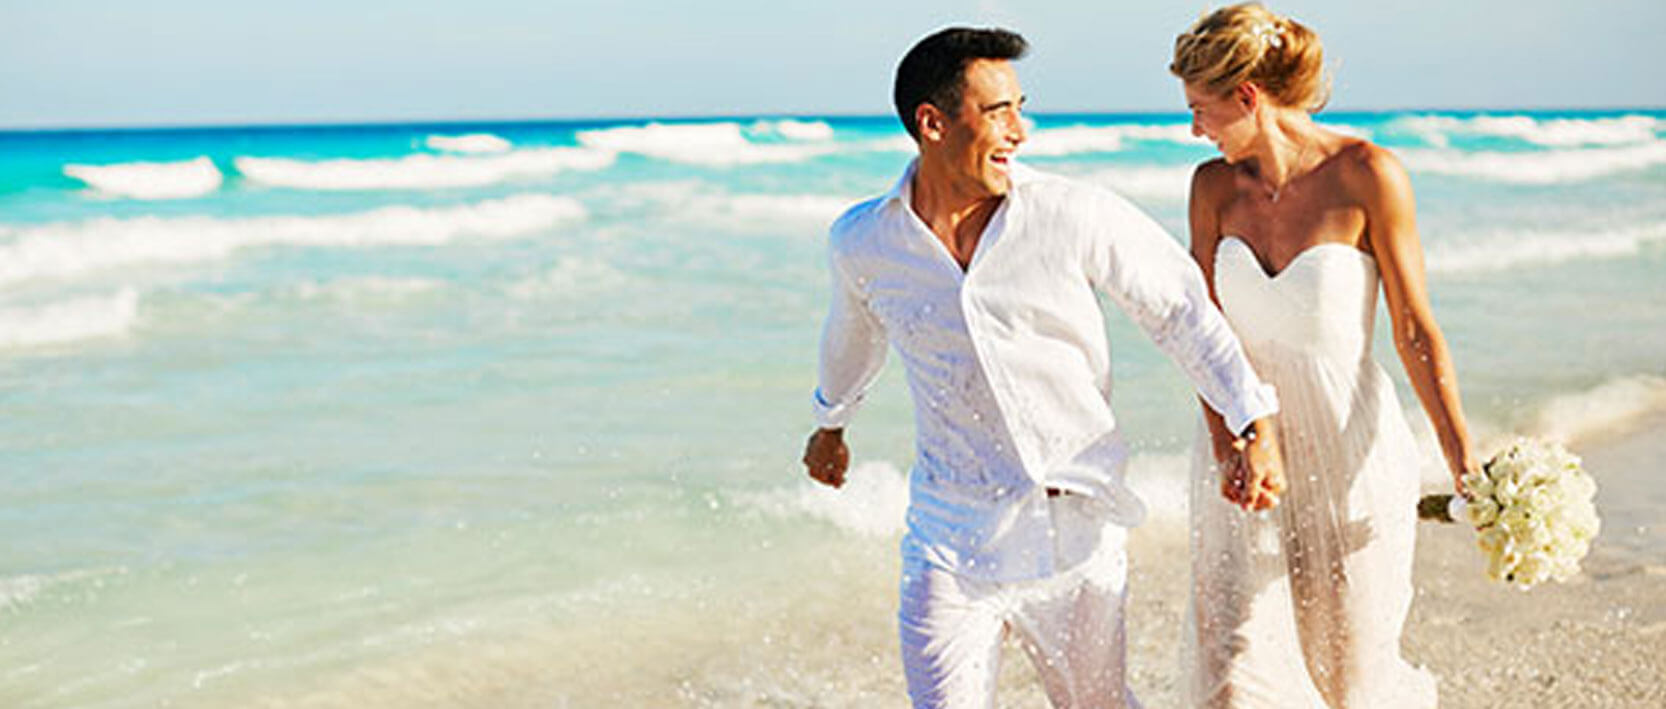 Hyatt Ziva Cancun Spa - For Just the Two of You Wedding Package